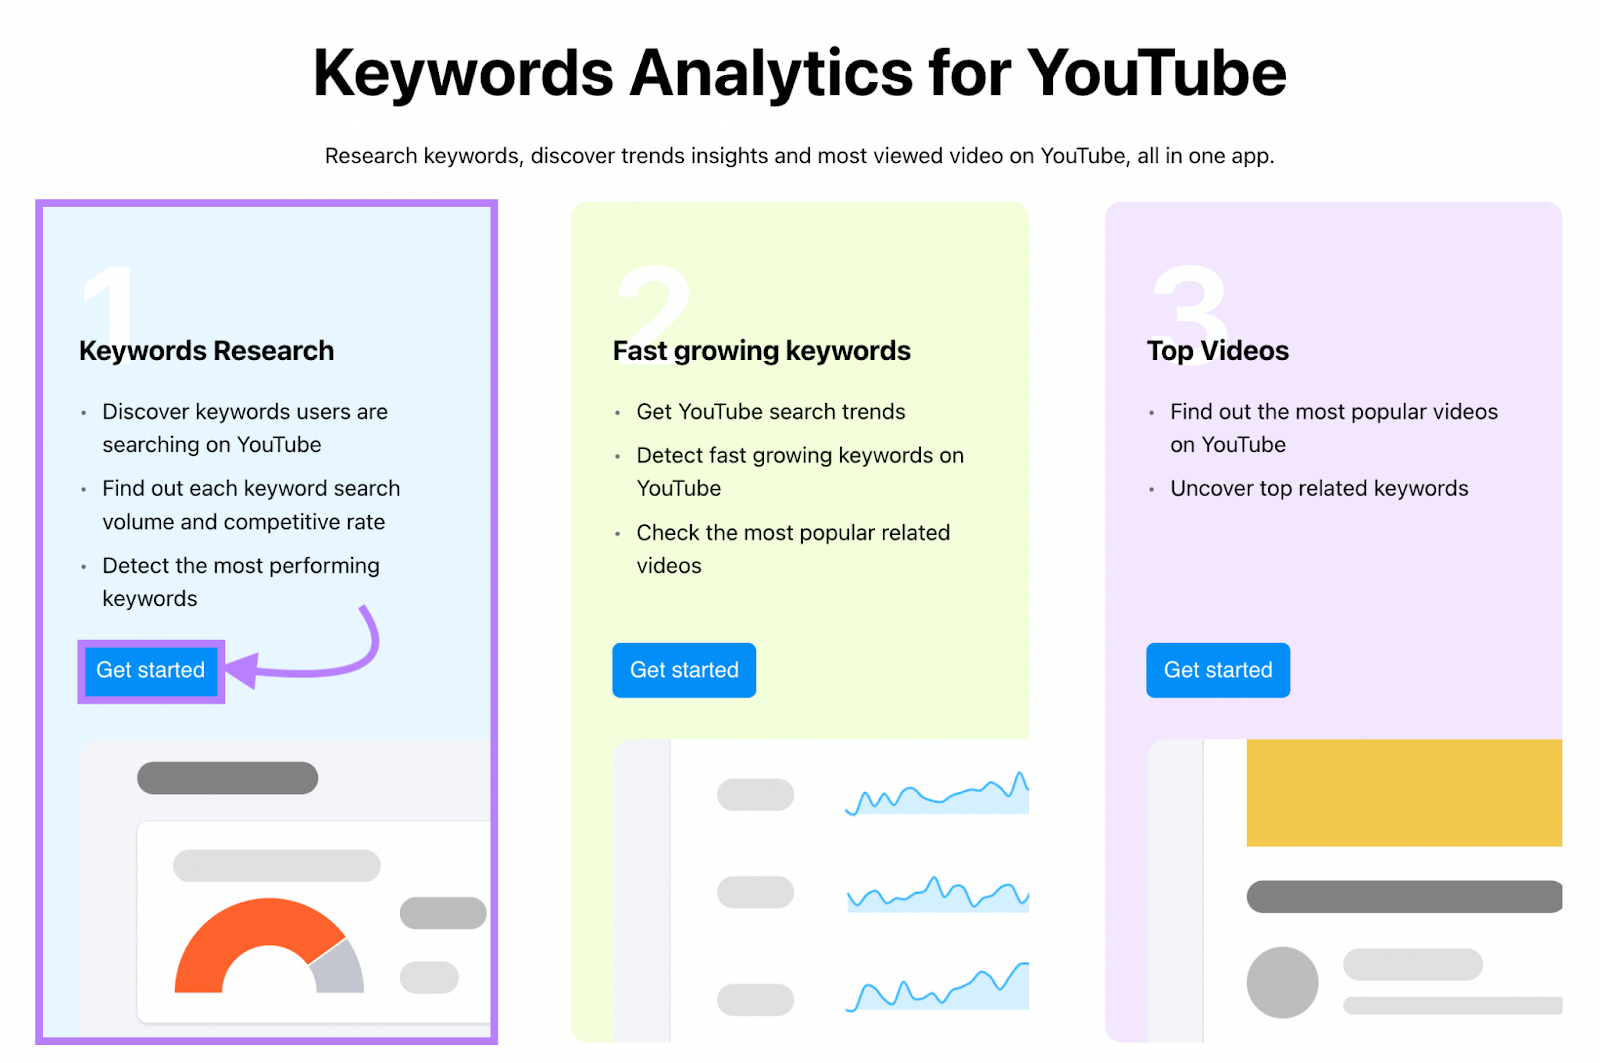 “Keywords Research” section highlighted on Keywords Analytics for YouTube page